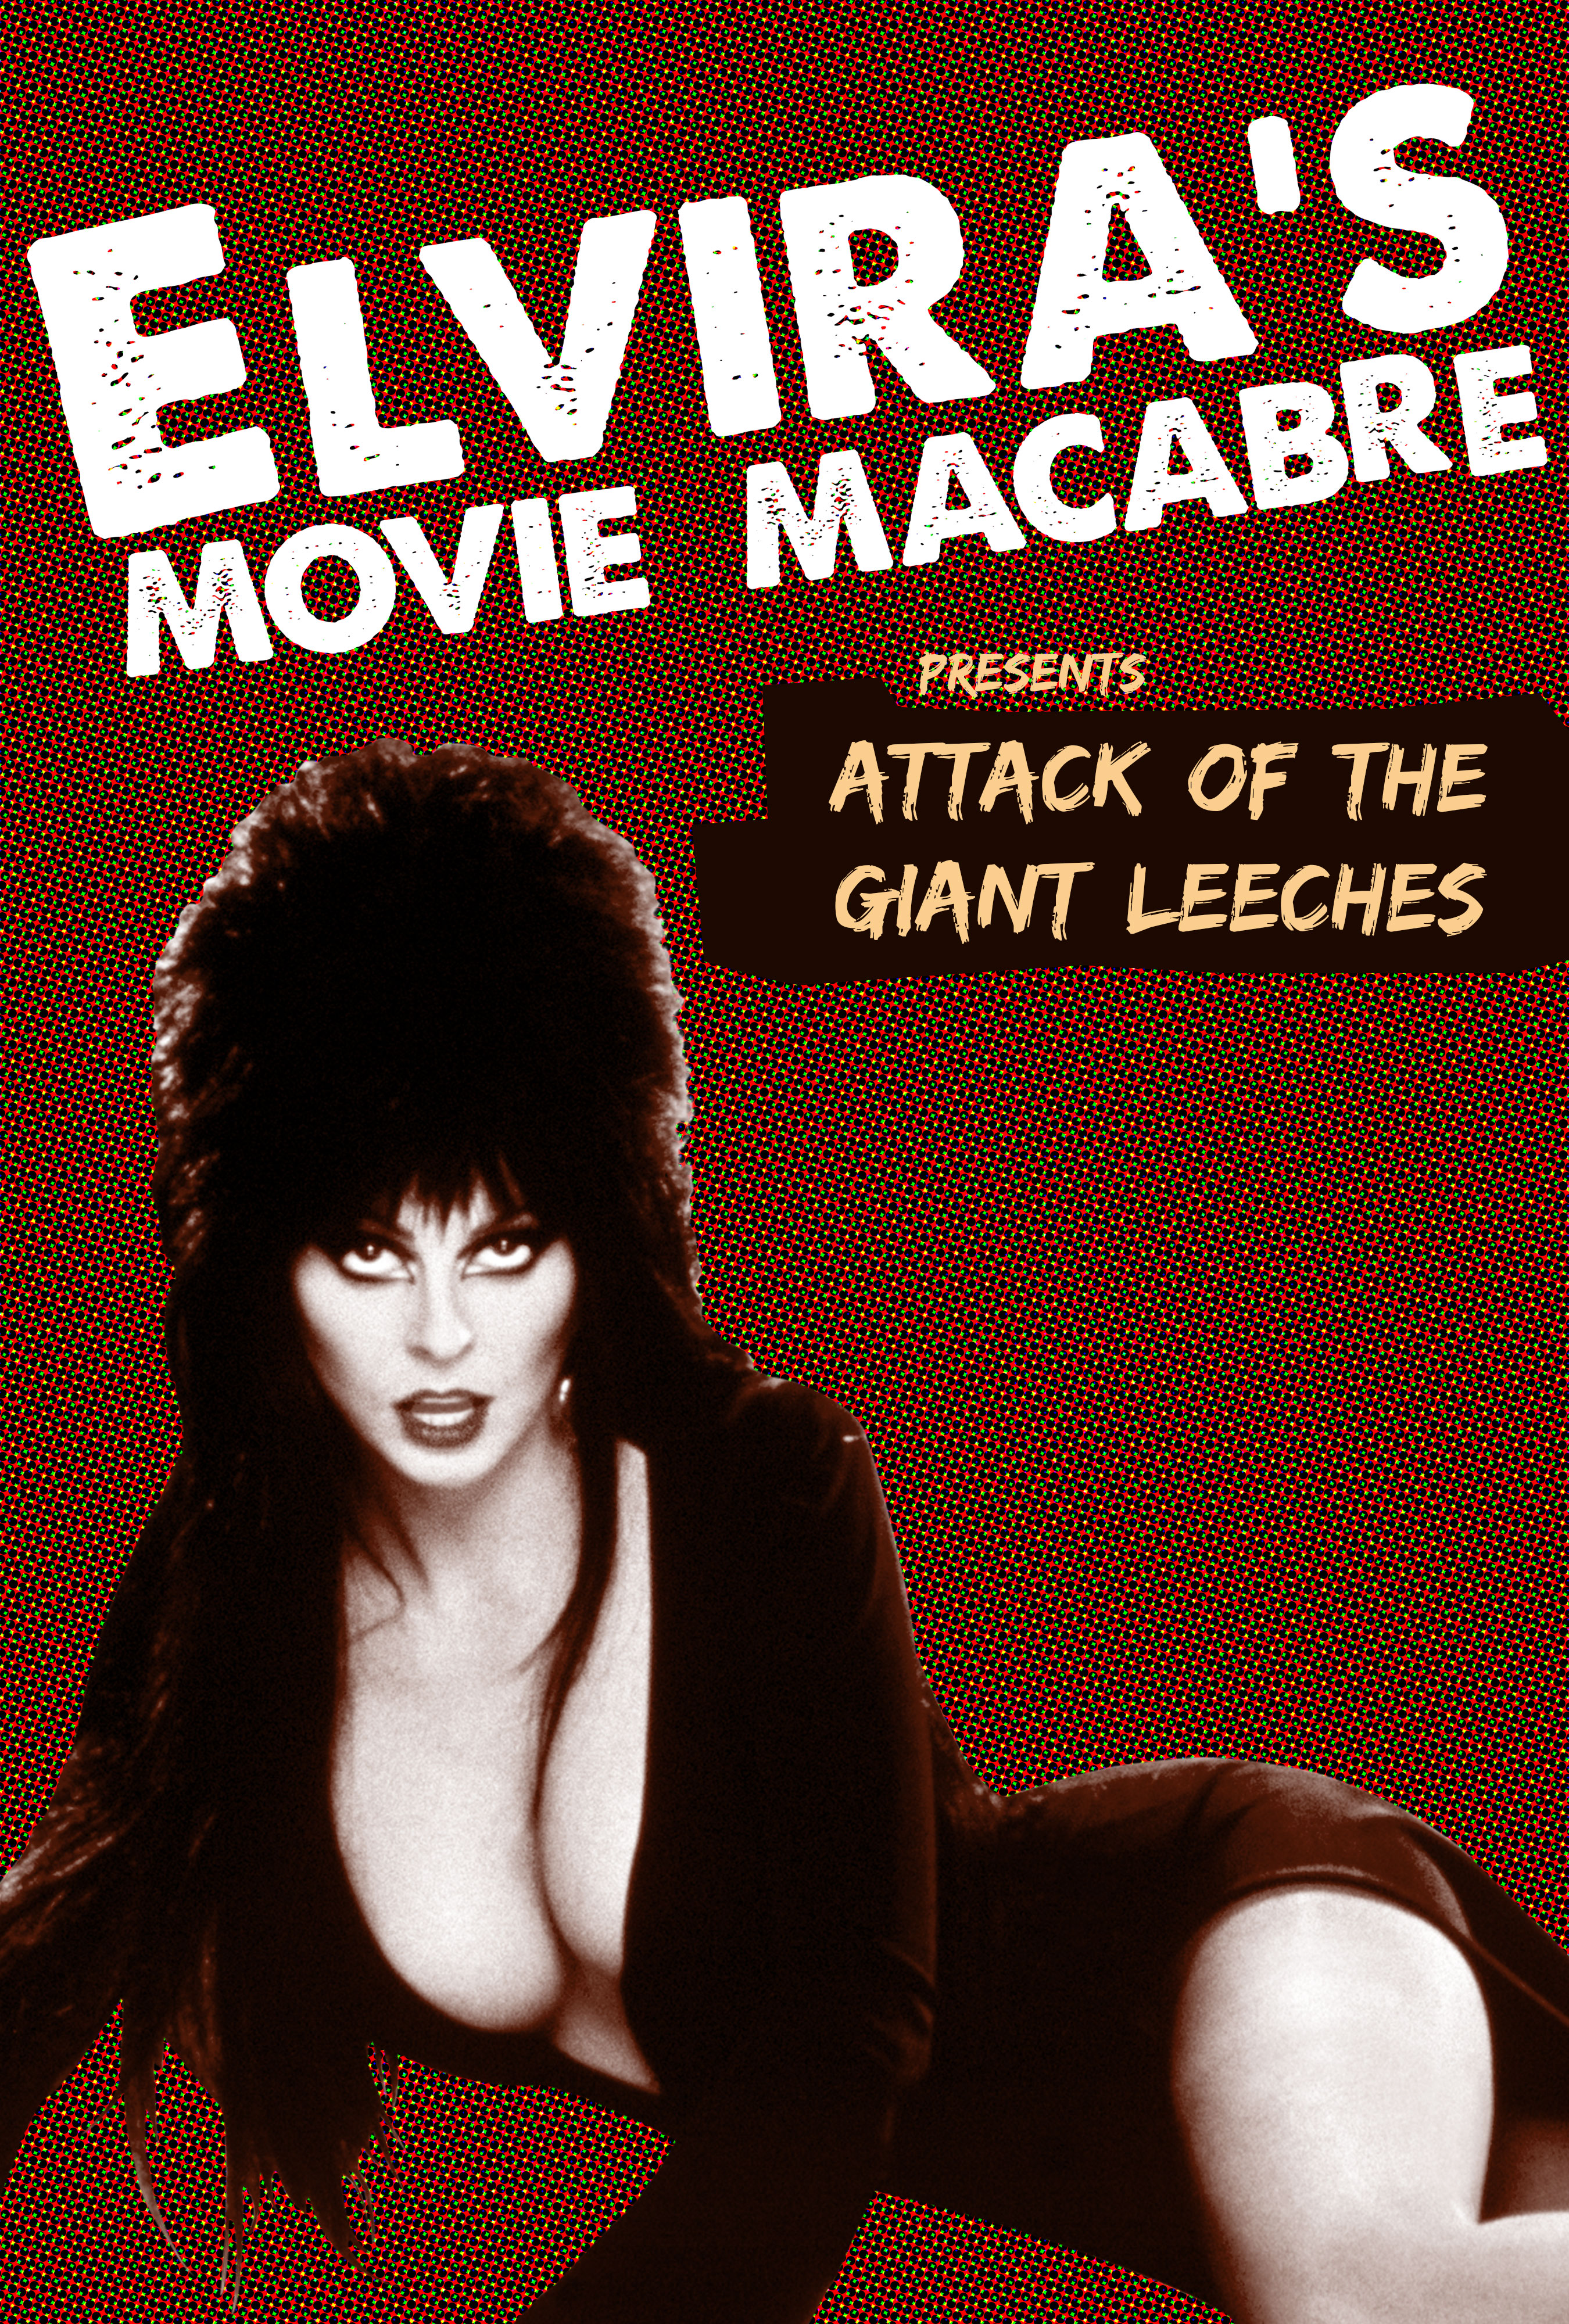 Elvira's Movie Macabre: Attack Of The Giant Leeches